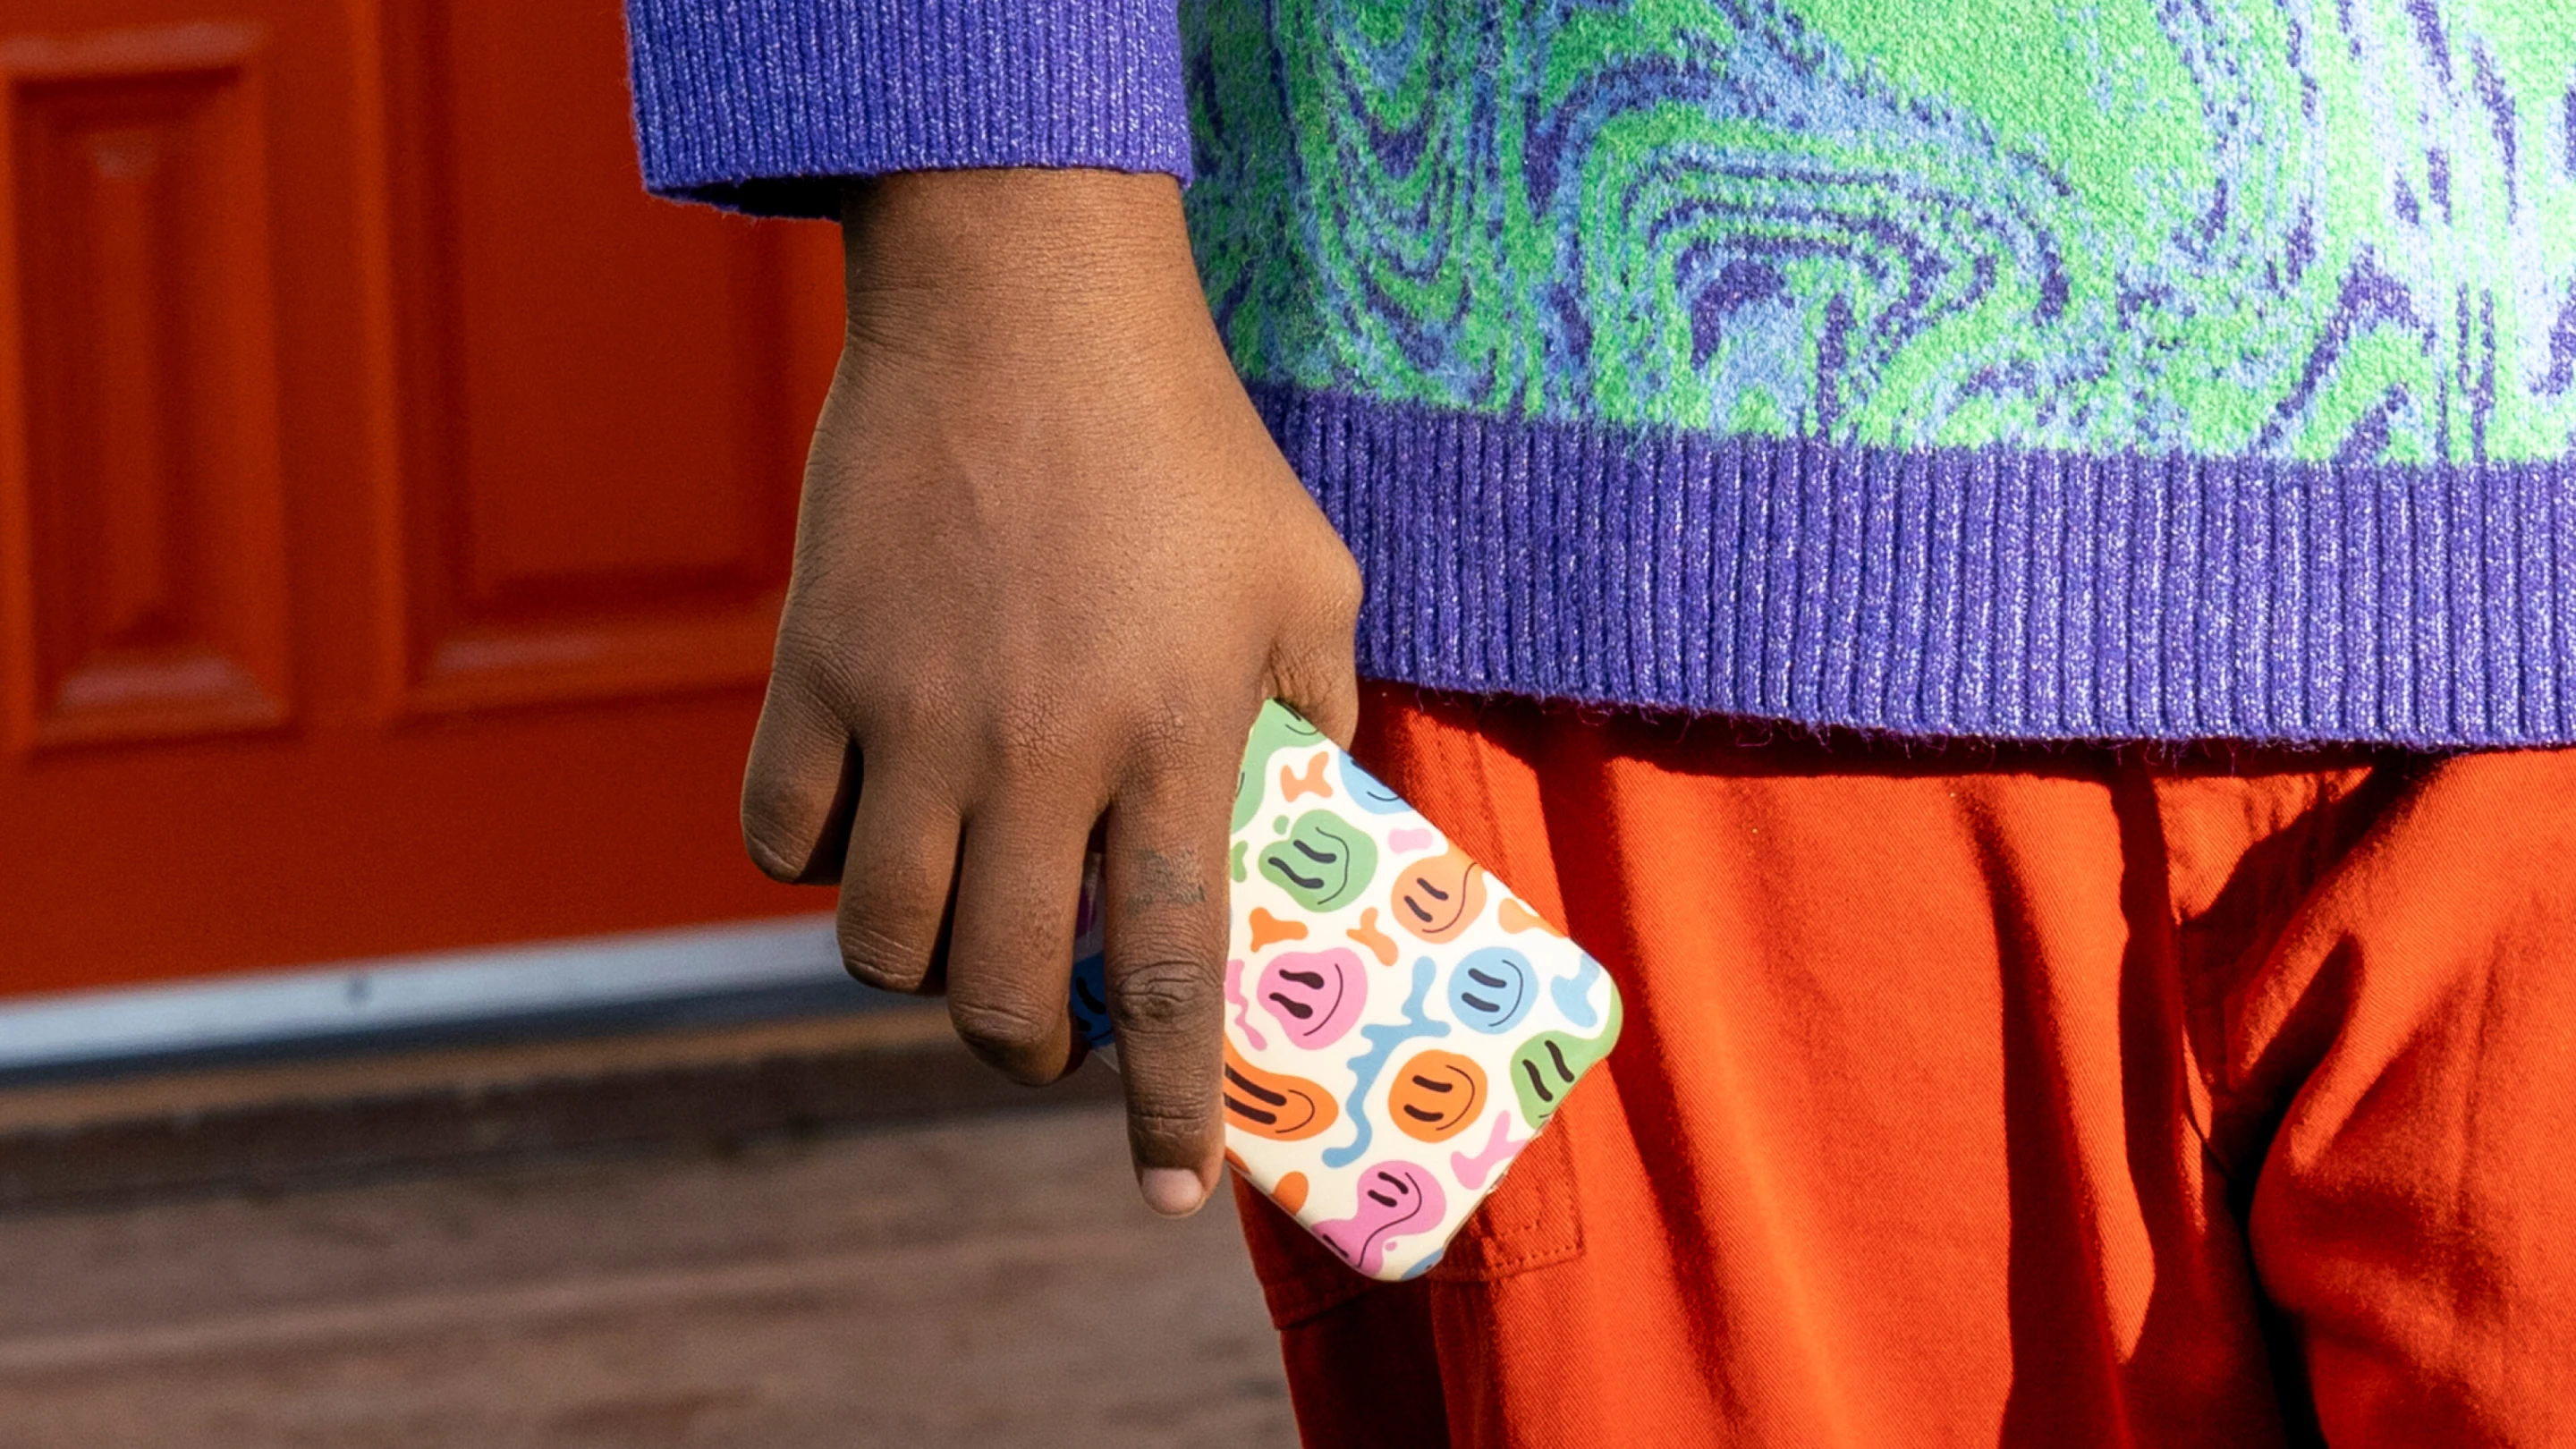 A person wearing a colorful sweater holds a phone in their hand. The phone case is covered in rainbow smiley faces.